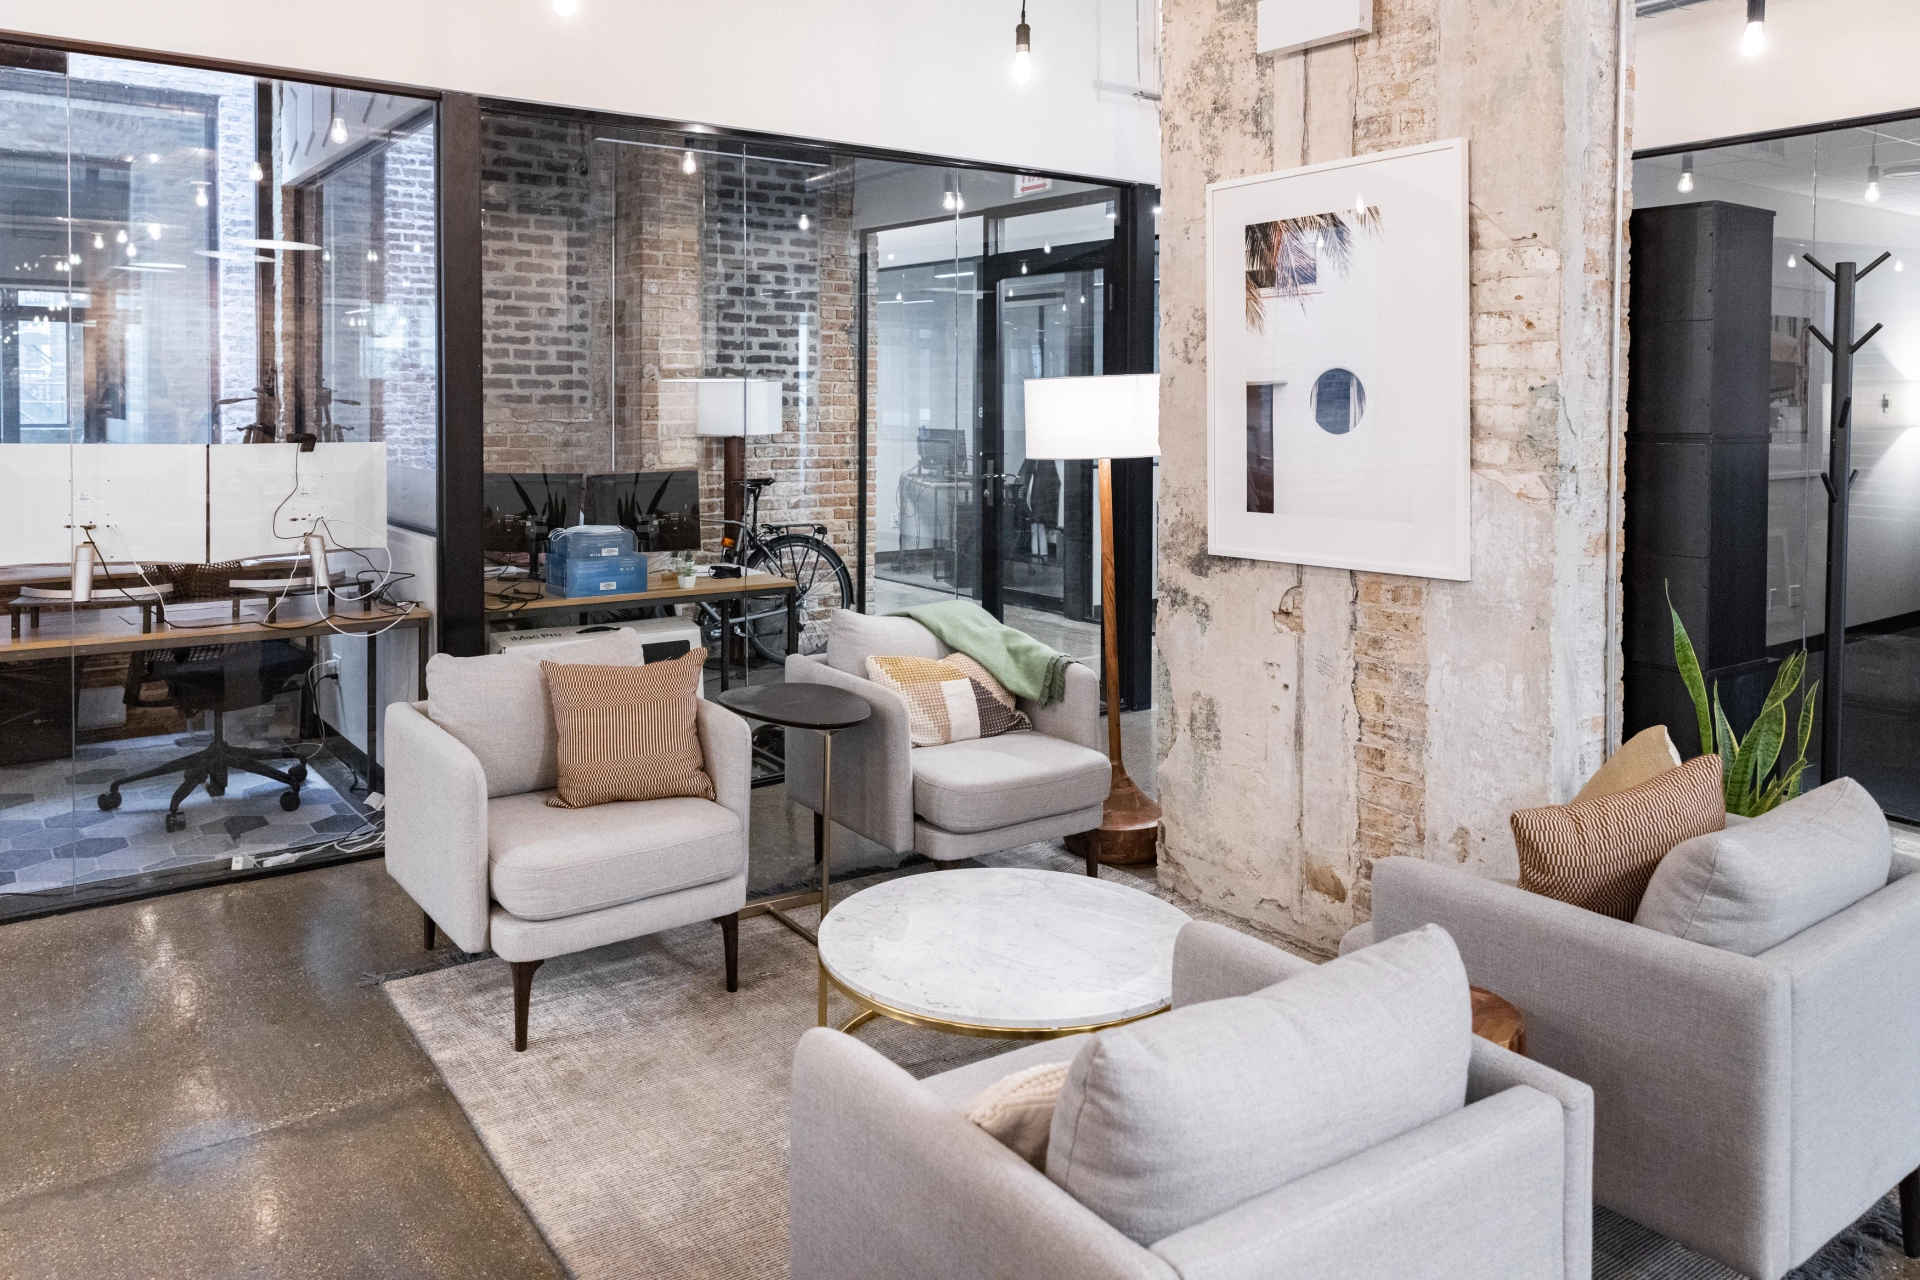 A modern office with coworking amenities, including couches, chairs, and a coffee table.